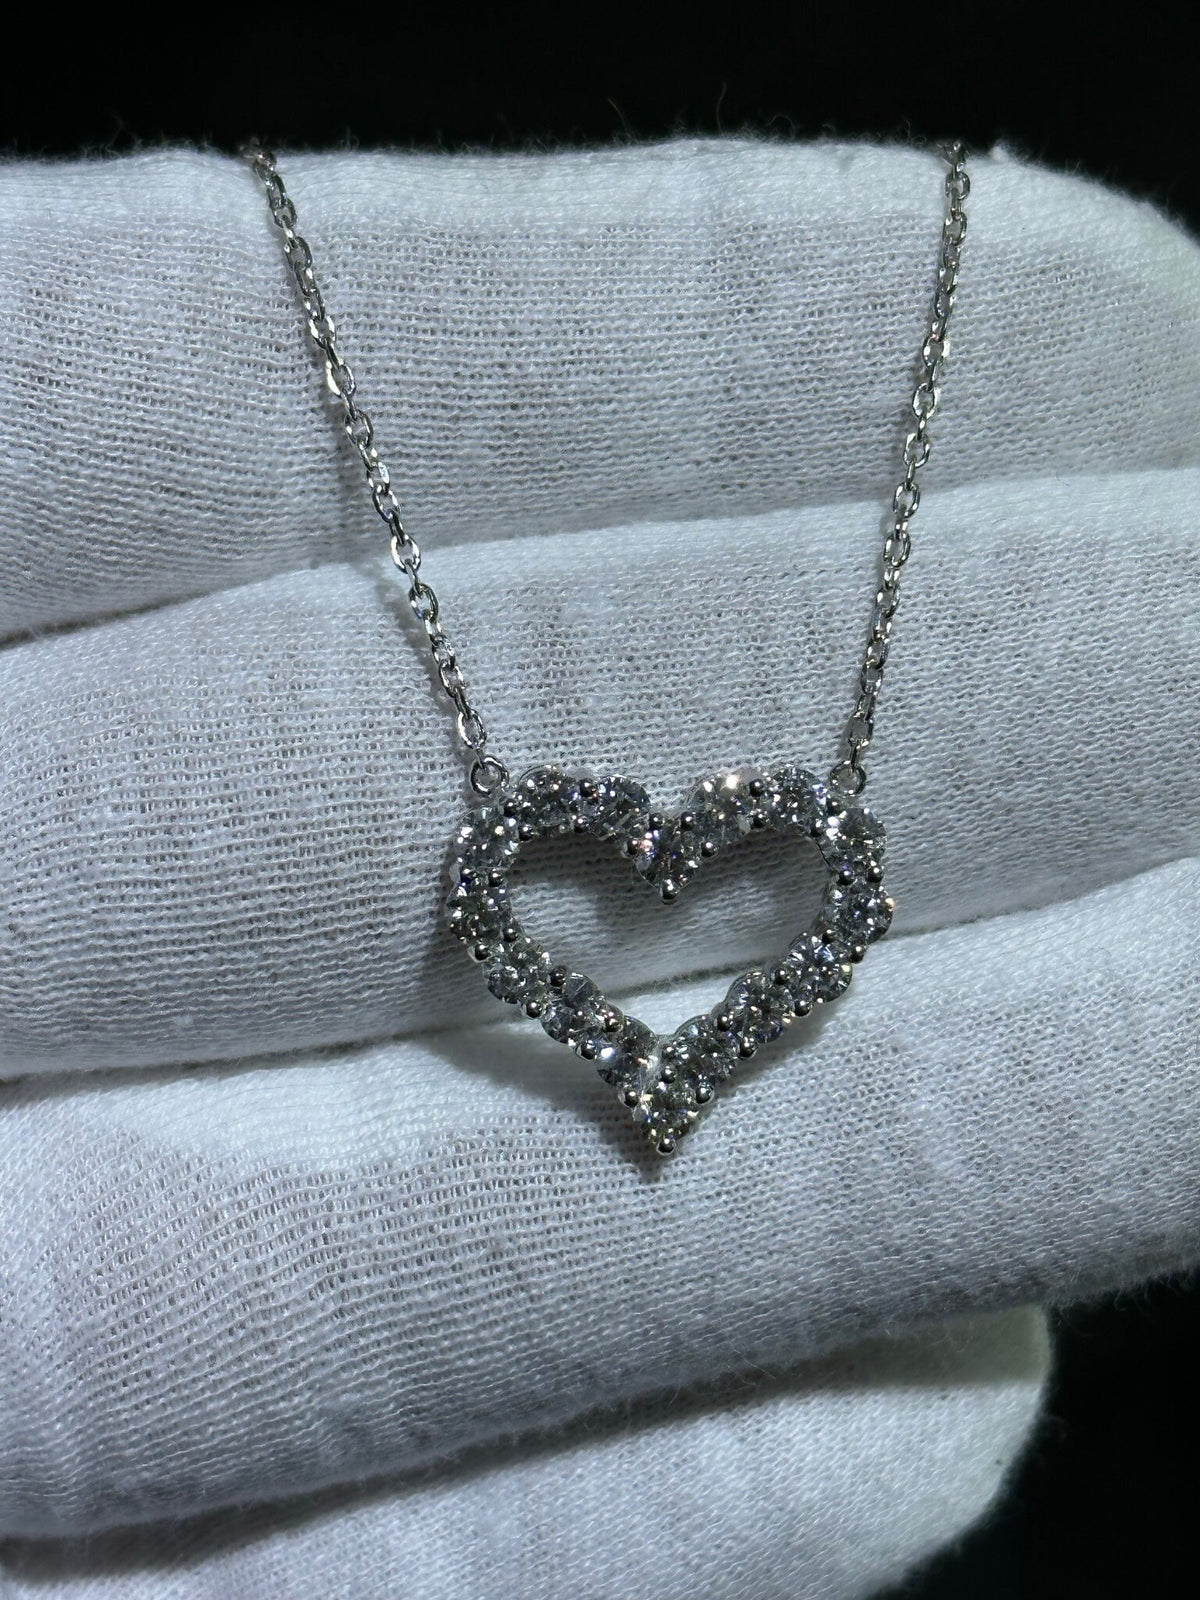 LIV 14KT Solid White Gold Natural White Diamonds Open Heart Halo  Pendant Necklace Gift